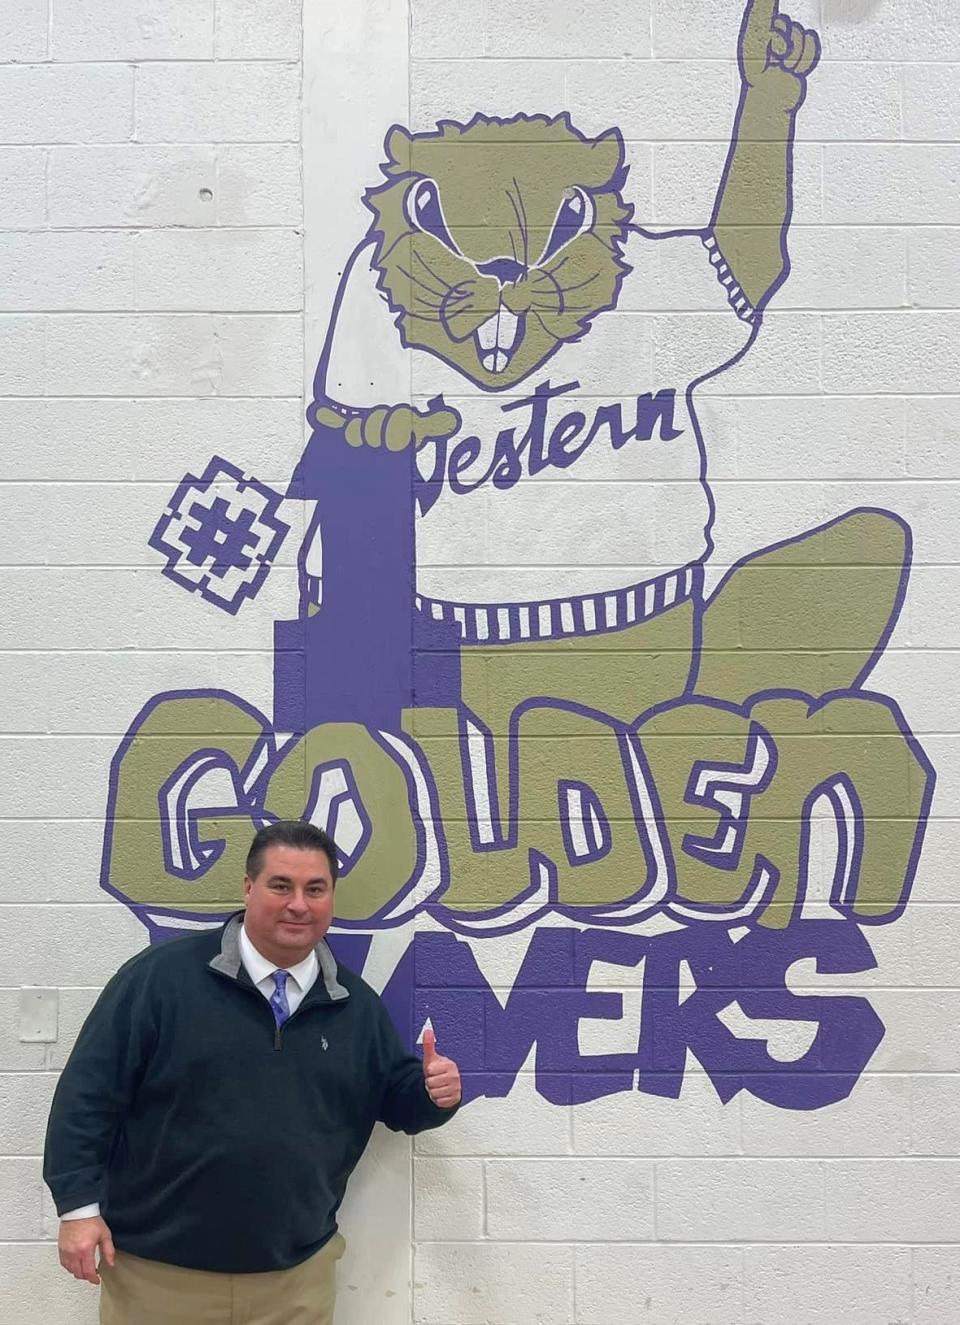 John Rosa poses before the Western Beaver logo at the high school last Wednesday night after he was hired as the Golden Beavers' athletic director.